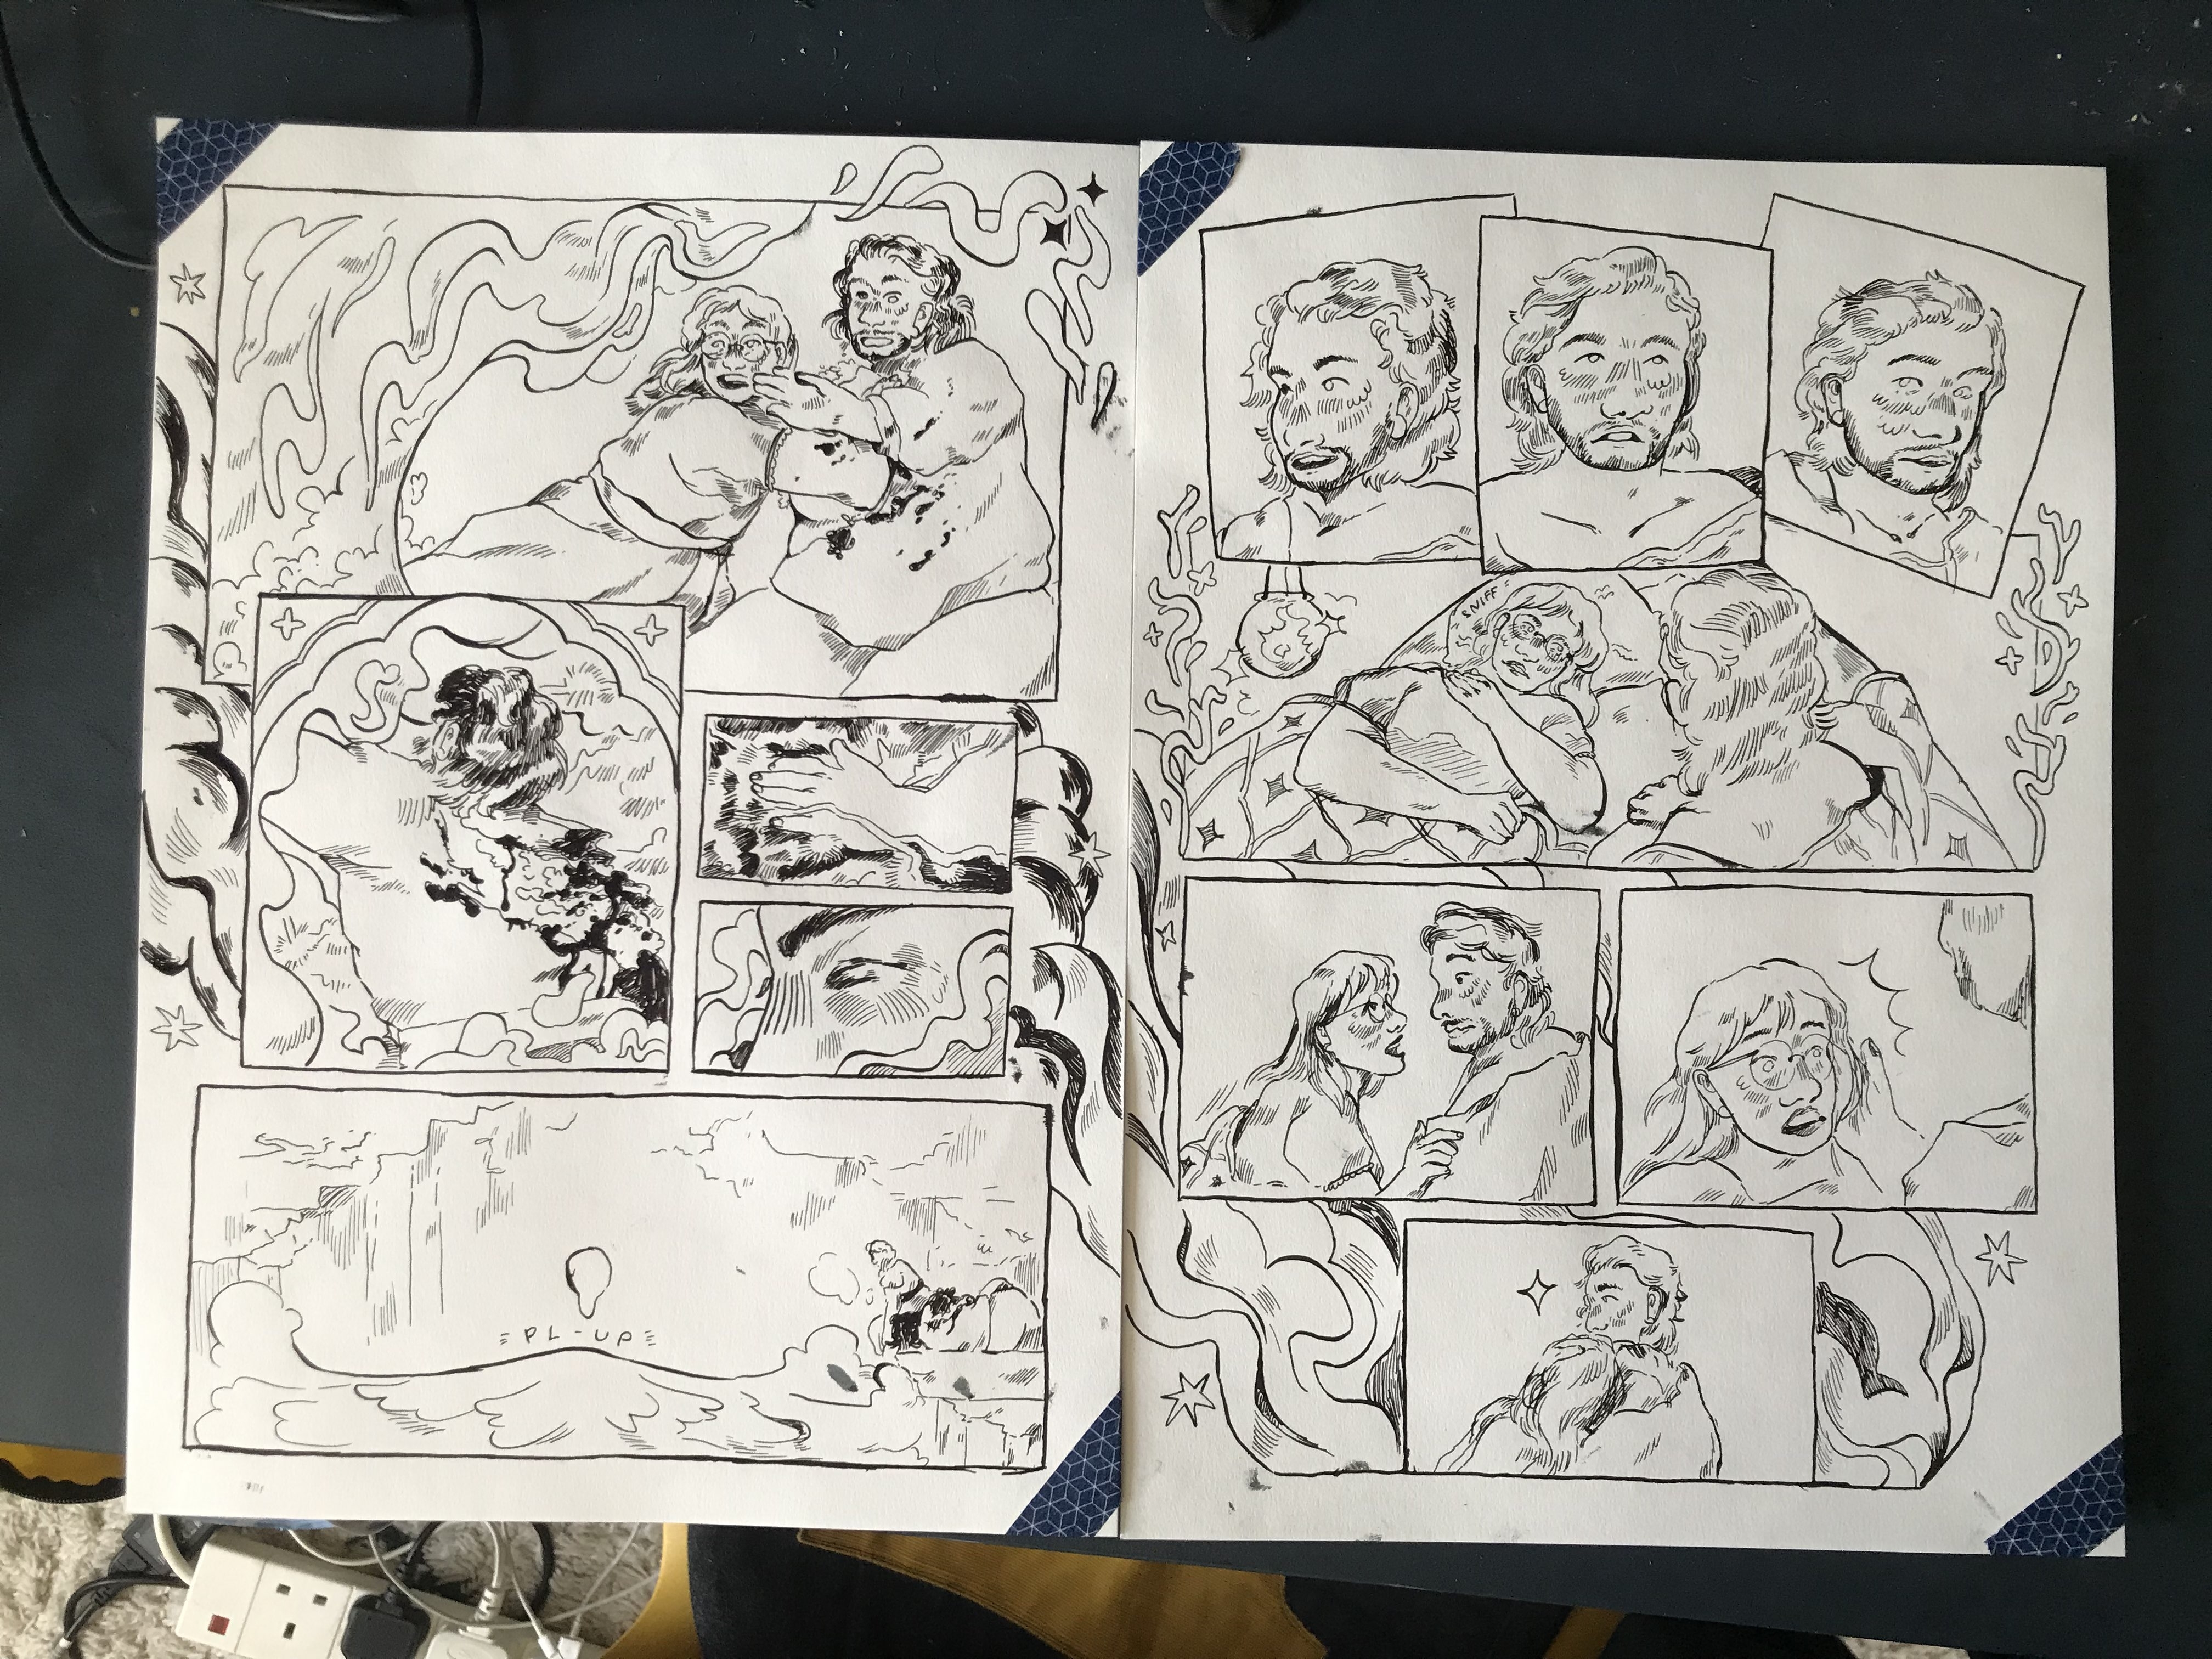 Two fully inked comic pages, with no text.